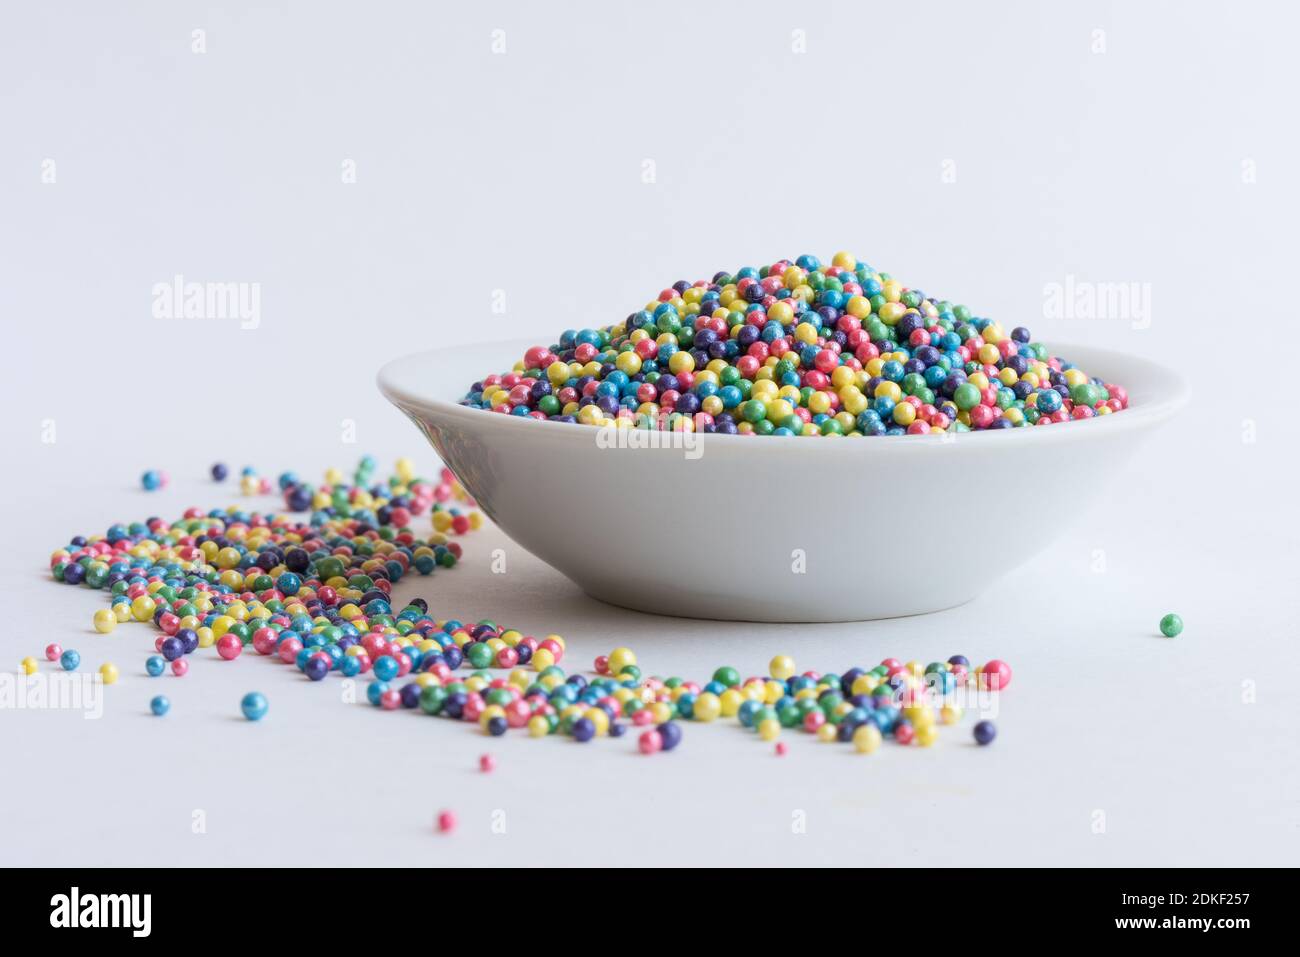 Multi Colored Sprinkles In Bowl On White Background Stock Photo